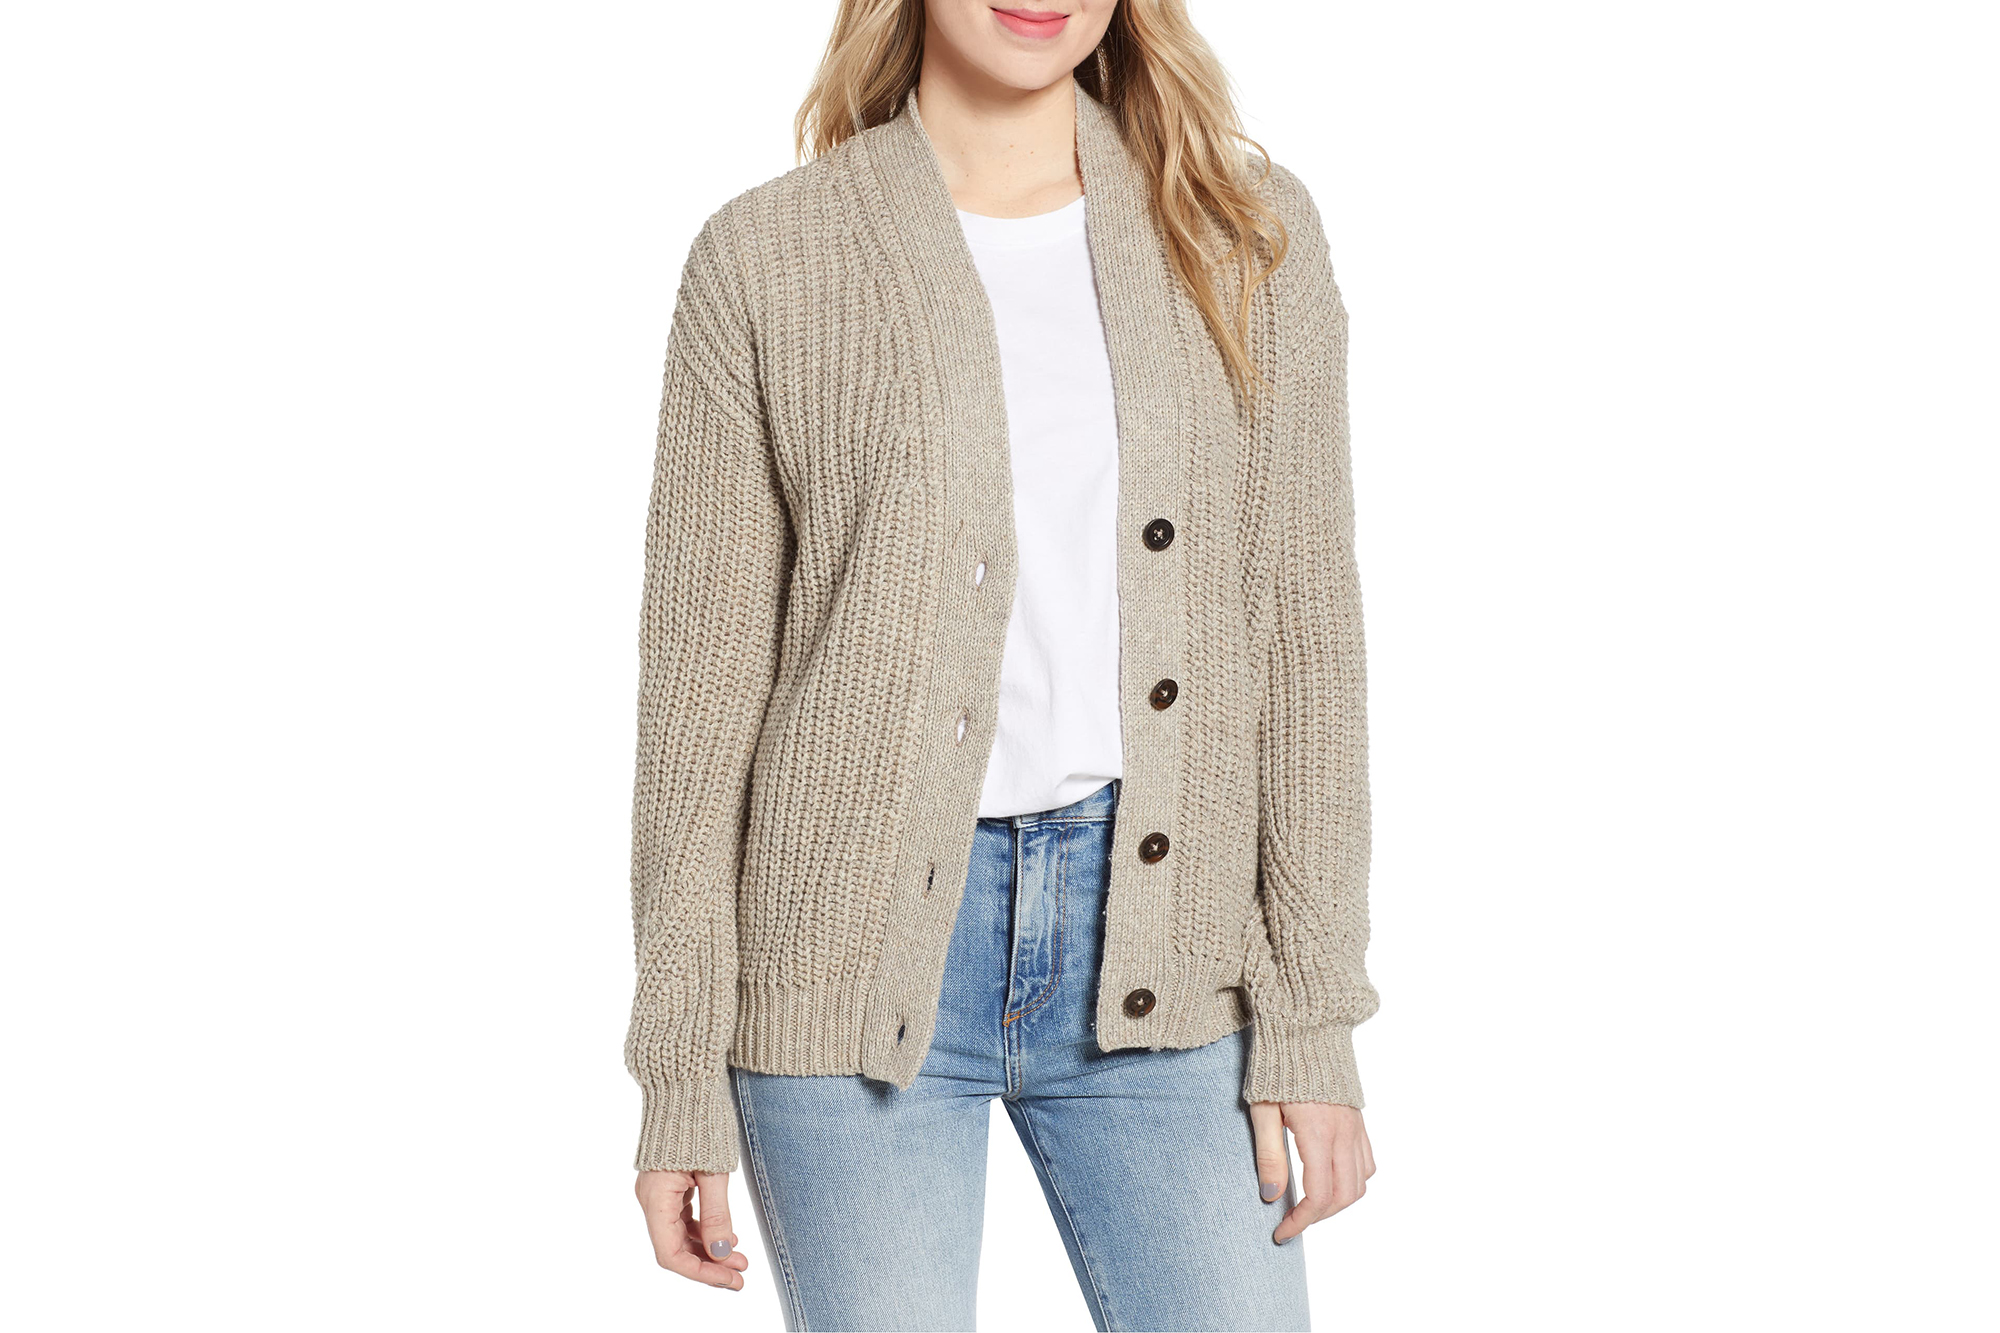 The BP. Grandma Stitch Cardigan Is Cozy, Chic and 40% Off